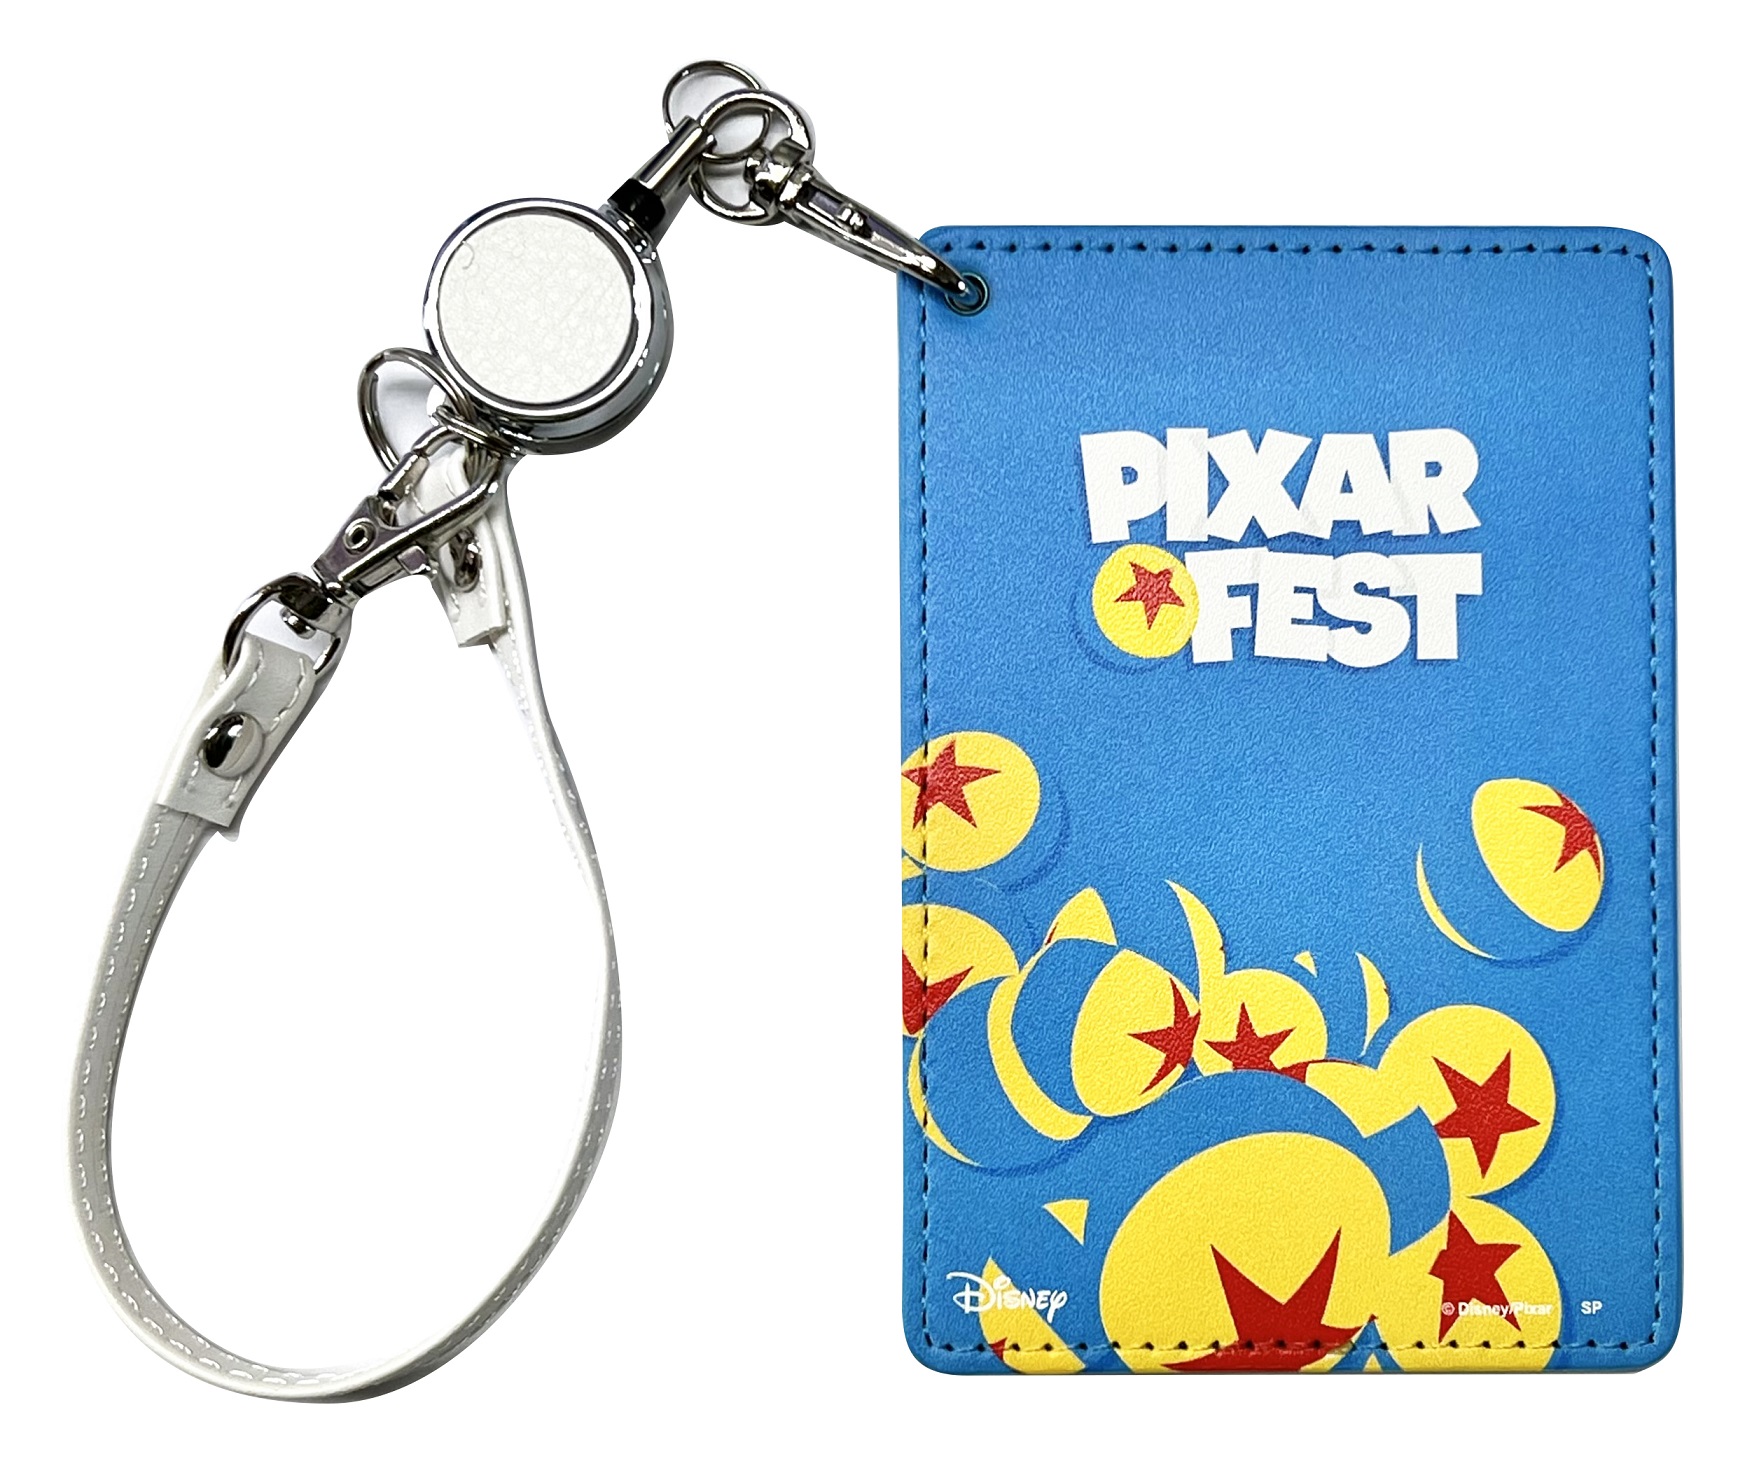 Ryokotomo - 1650545263 293 c809143b pixar fest pop up store by small planet to open at